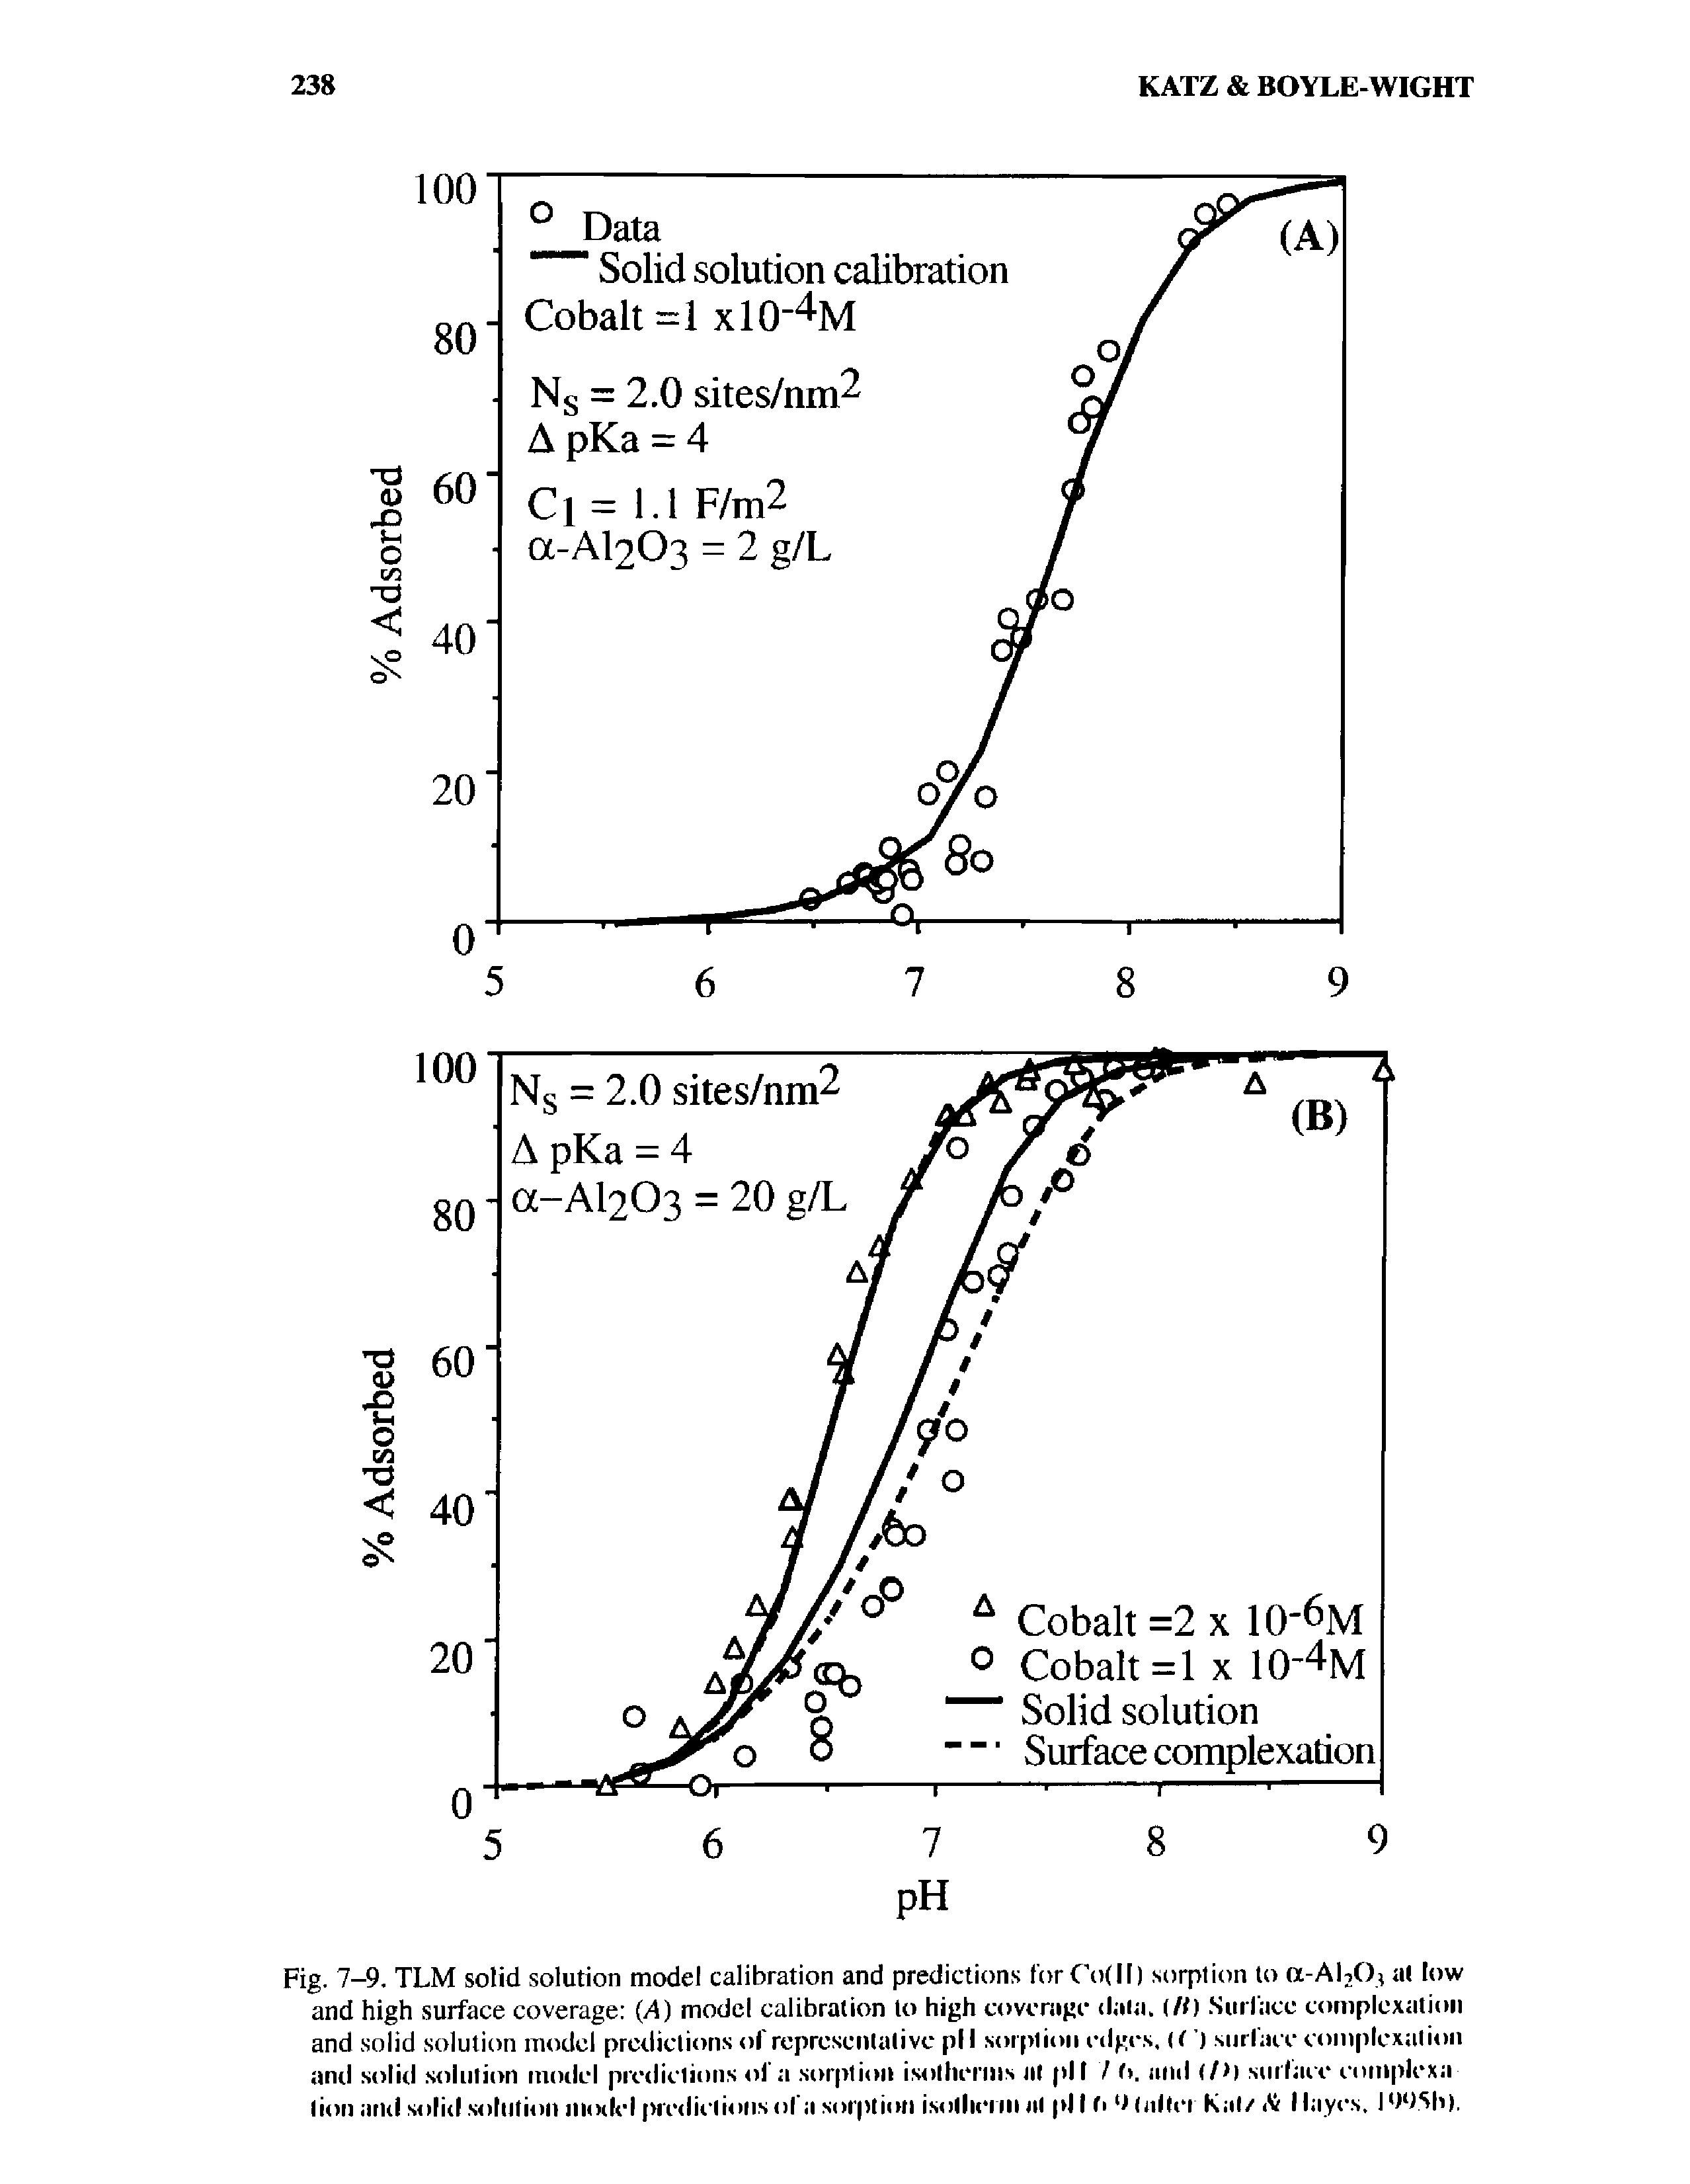 Fig. 7-9. TLM solid solution model calibration and predictions for Co(ll) sorption to a-AUO, at low and high surface coverage (A) model calibration to high coverage data, t/f) Surface complexatiou and solid solution model predictions of representative pi I sorption edges. (O surface complexatiou and solid solution model predictions of a sorption isotherms at pi I / t>. and </>) surface couiplexa-lion and solid solution. a sorption isotherm at pi 11> (alter Kal/ Hayes, 19 ISh).